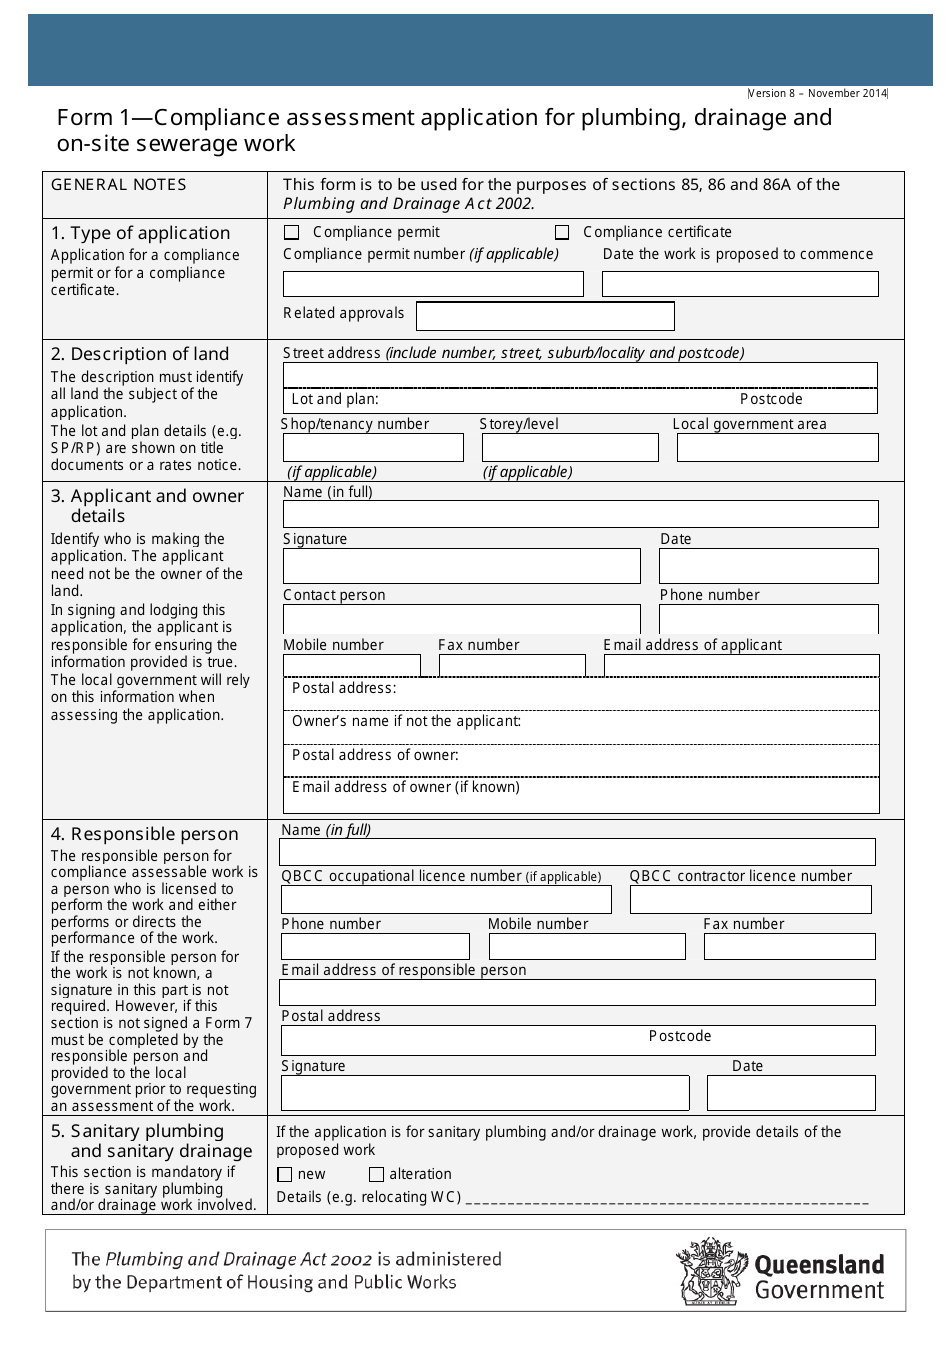 Form 1 Compliance Assessment Application for Plumbing, Drainage and on-Site Sewerage Work - Queensland, Australia, Page 1